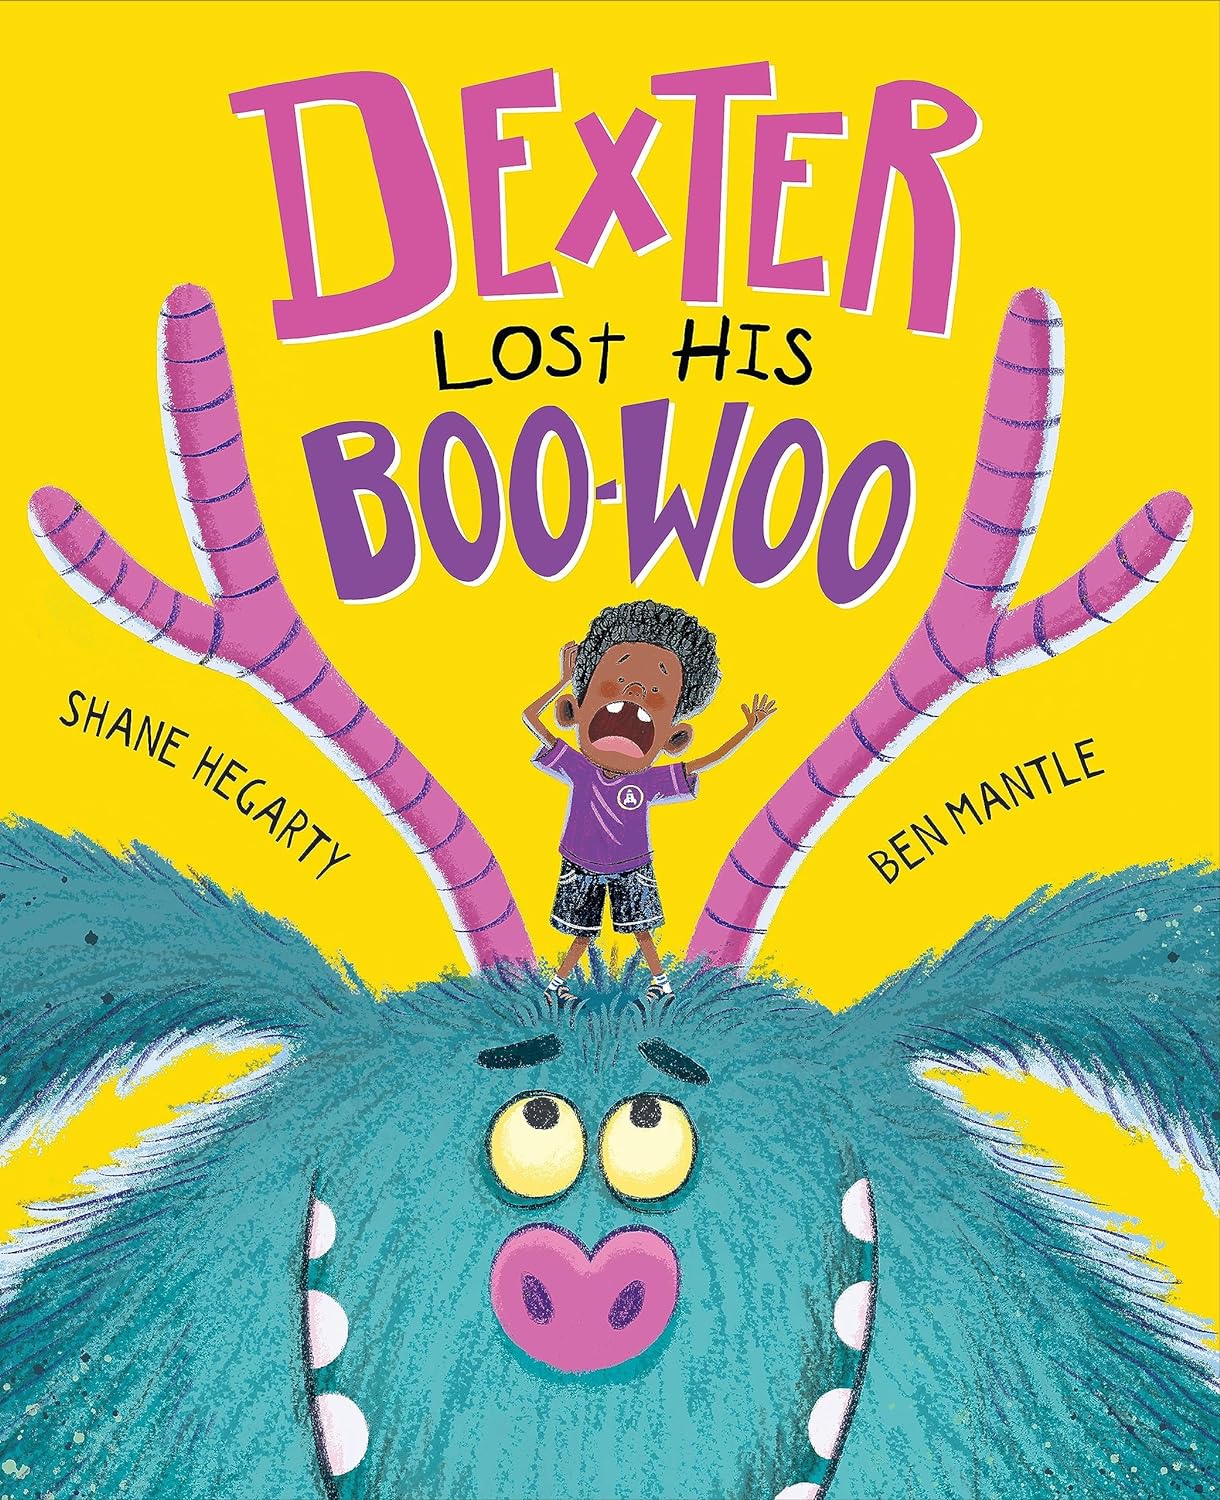 Shane Hegarty: Dexter Lost His Boo-Woo, illustrated by Ben Mantle